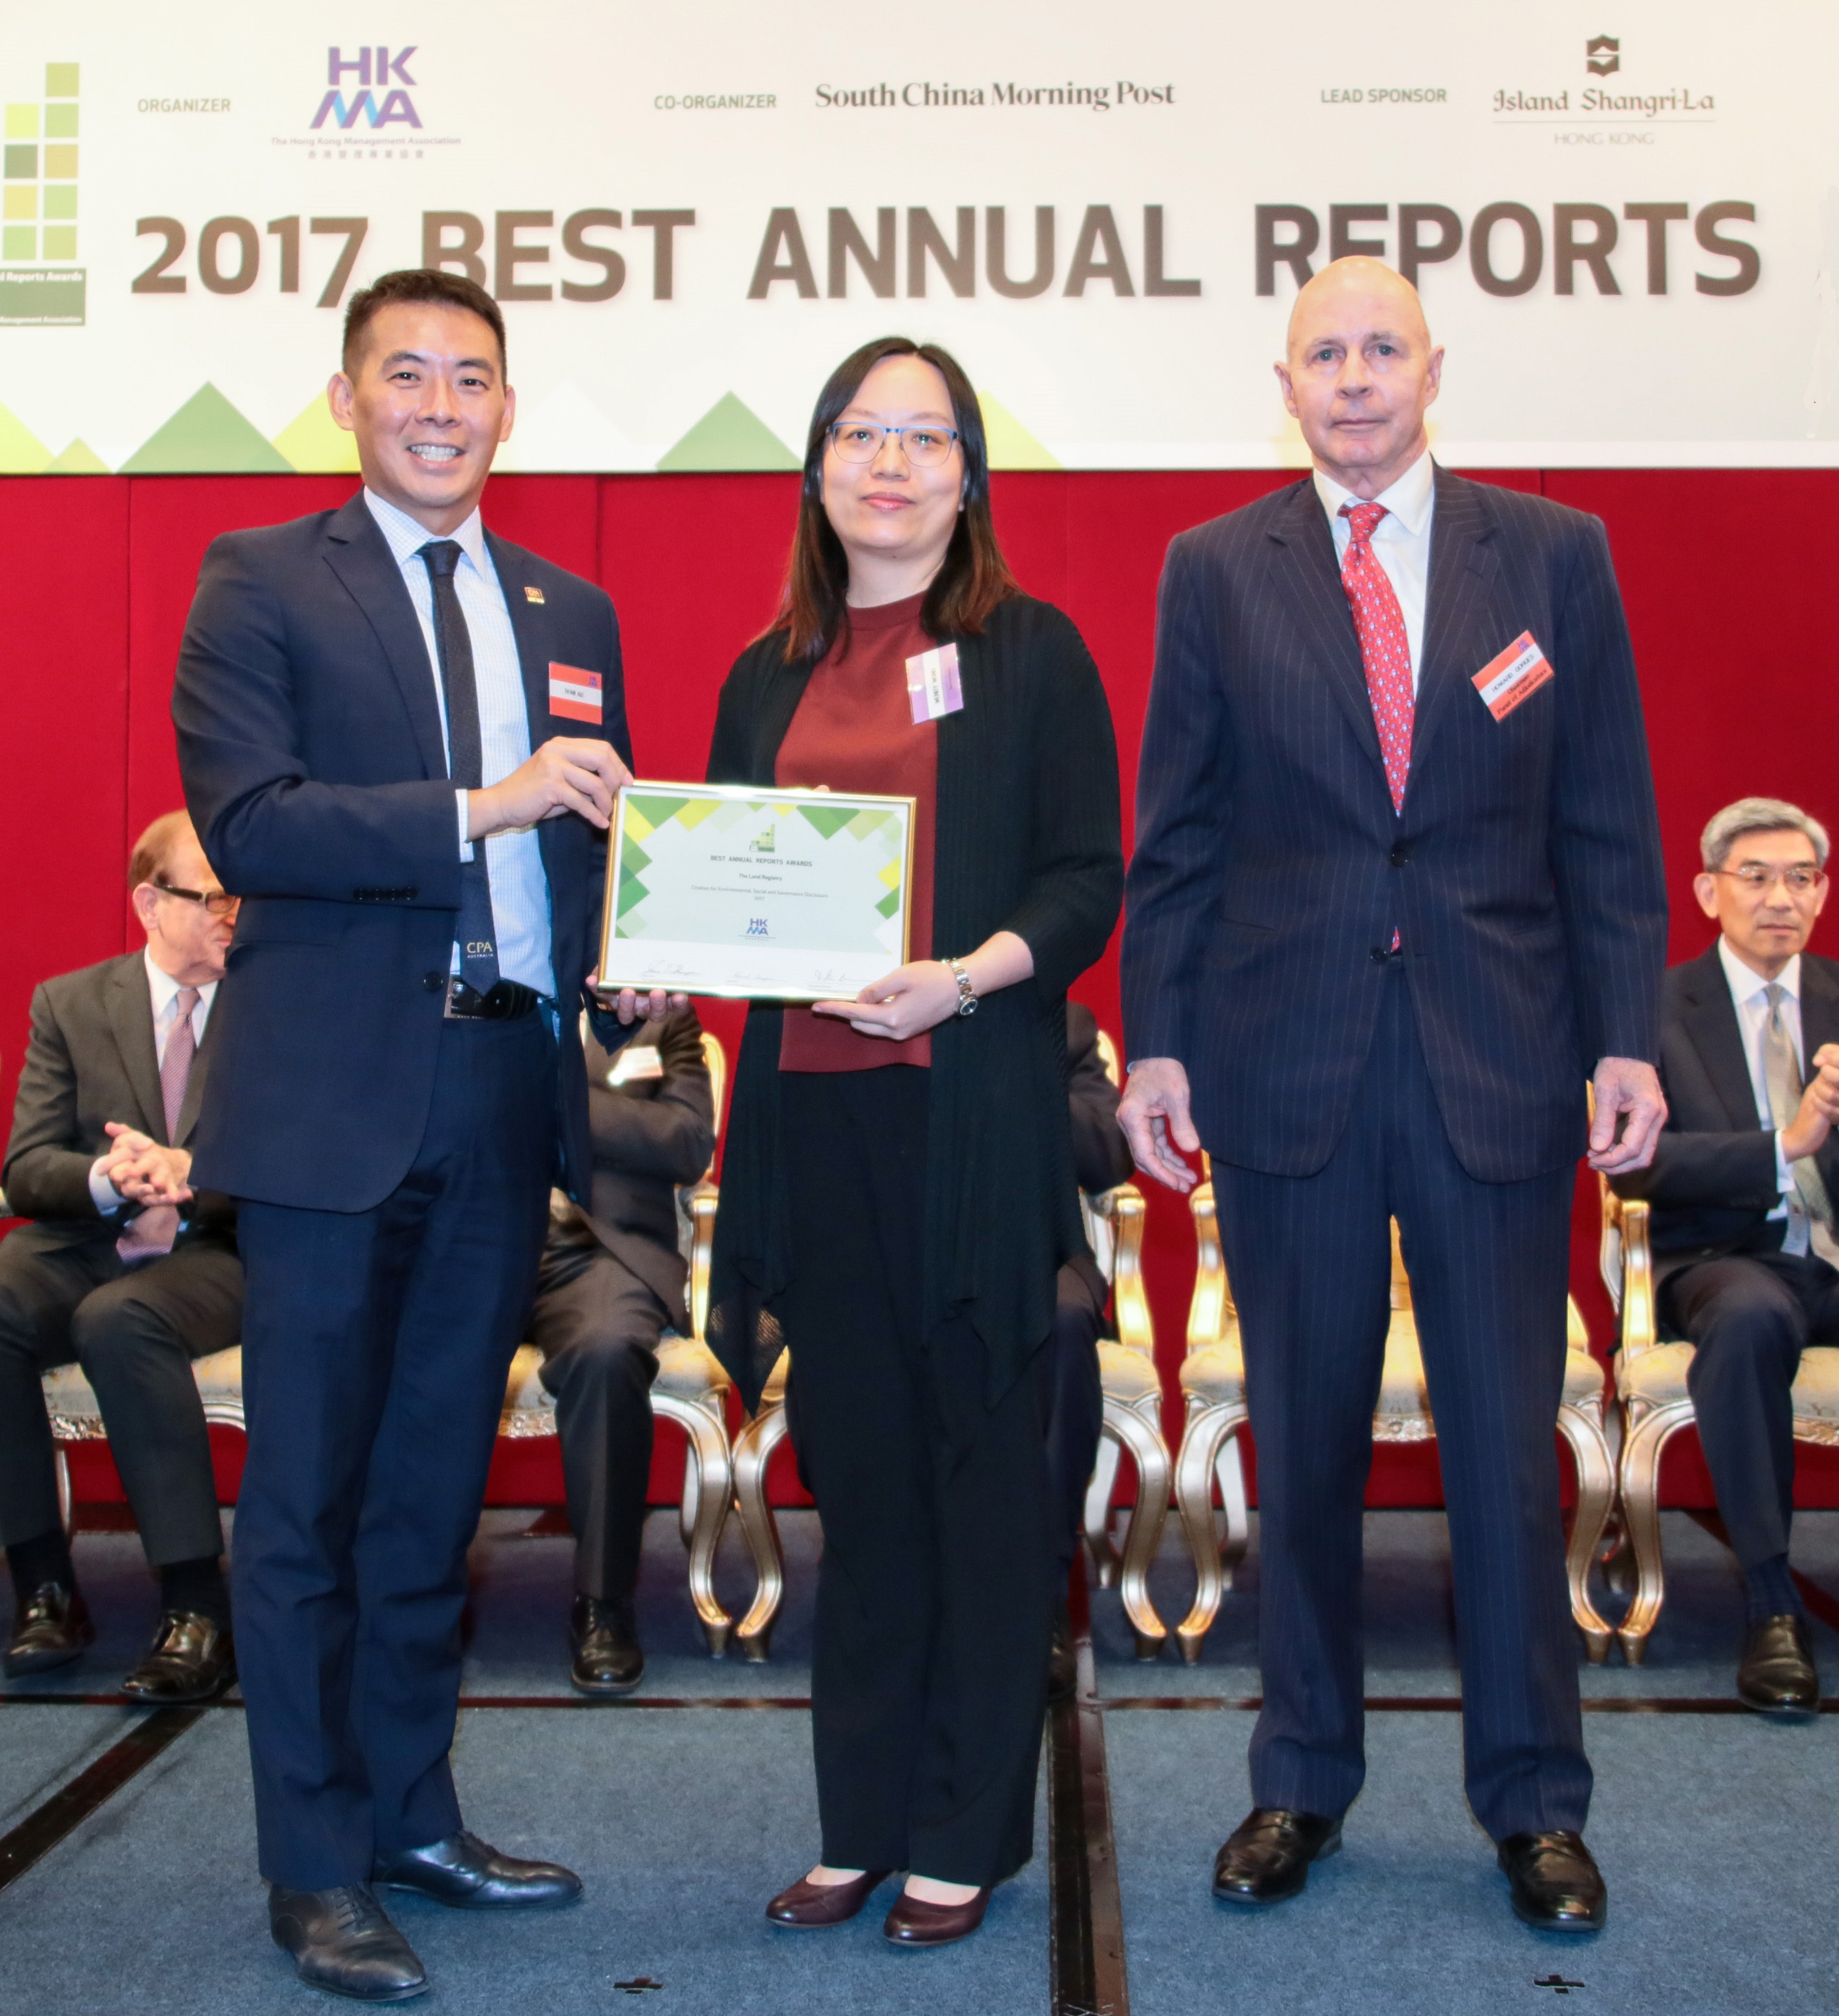 Awards for Land Registry Trading Fund (LRTF) Annual Report 2015/16